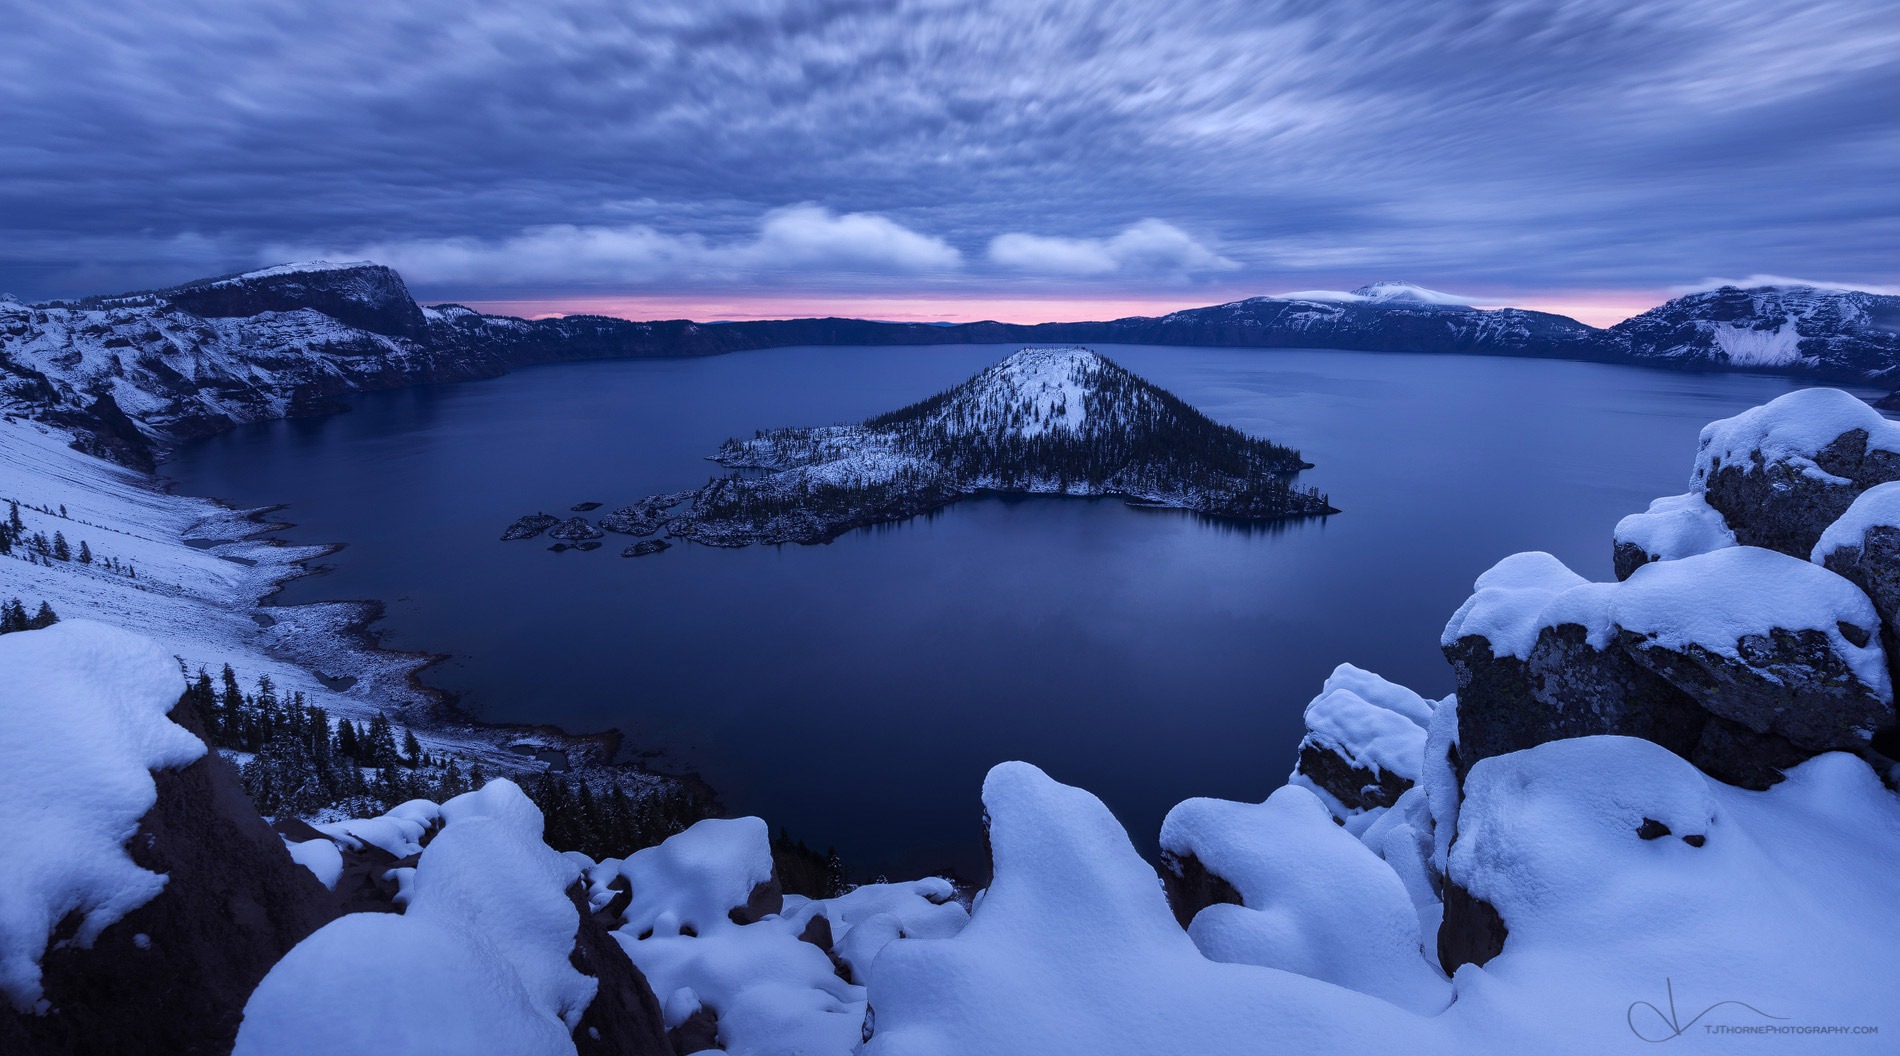 Sunrise on the morning of the first snow of the season at Crater Lake Lake National Park, Oregon. Crater Lake National Park is...